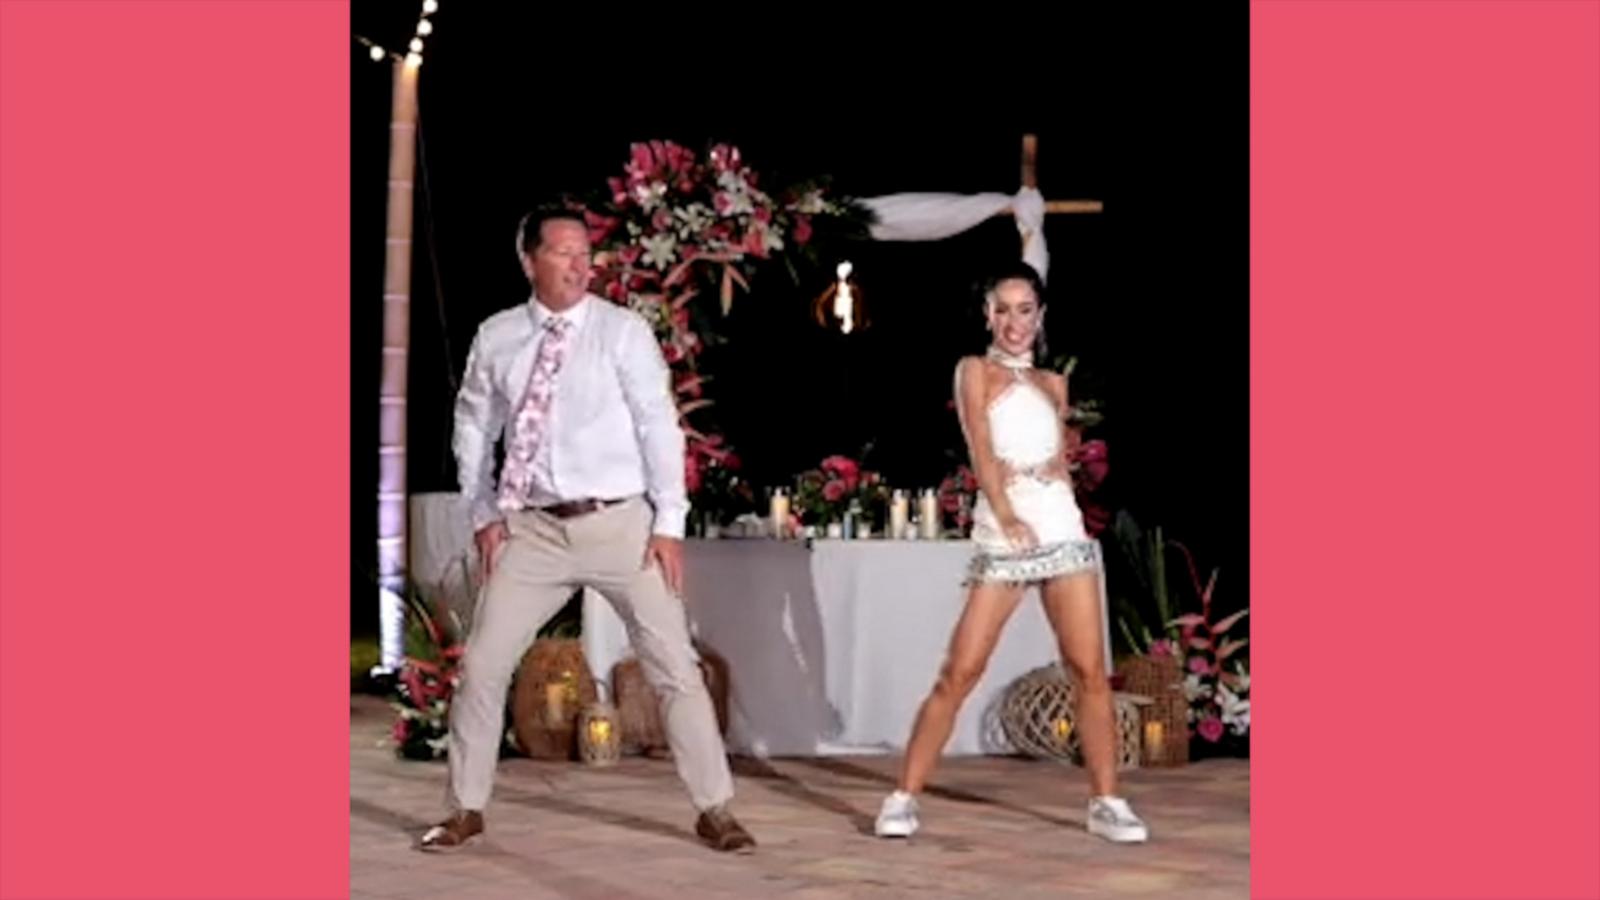 VIDEO: Bride and father show off their dance moves at wedding